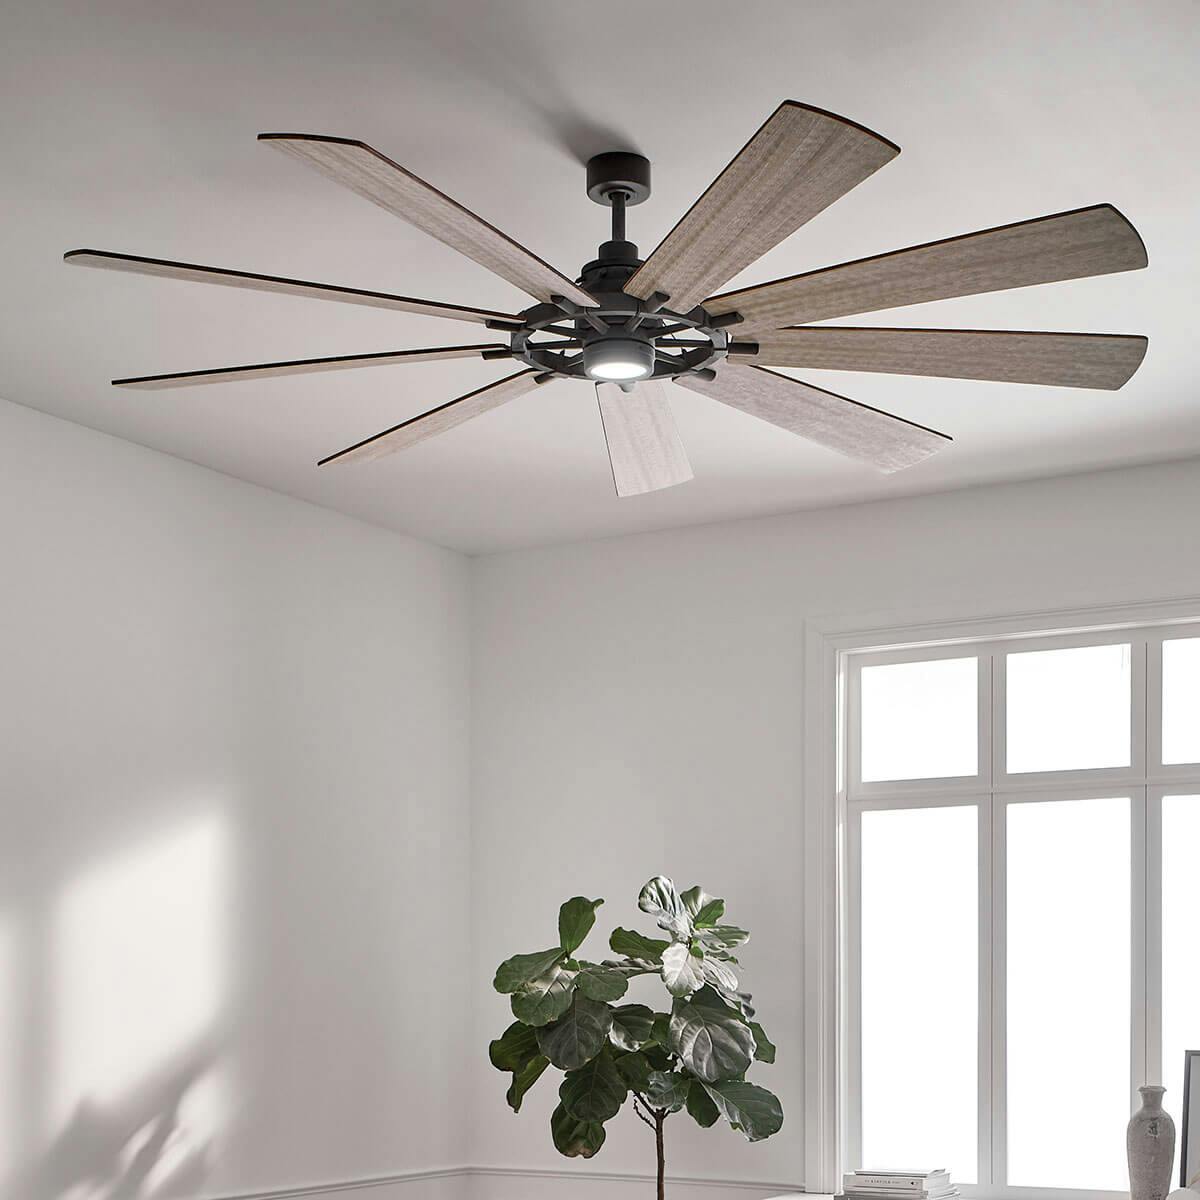 Day time living room image featuring Colerne ceiling fan 300285WZC